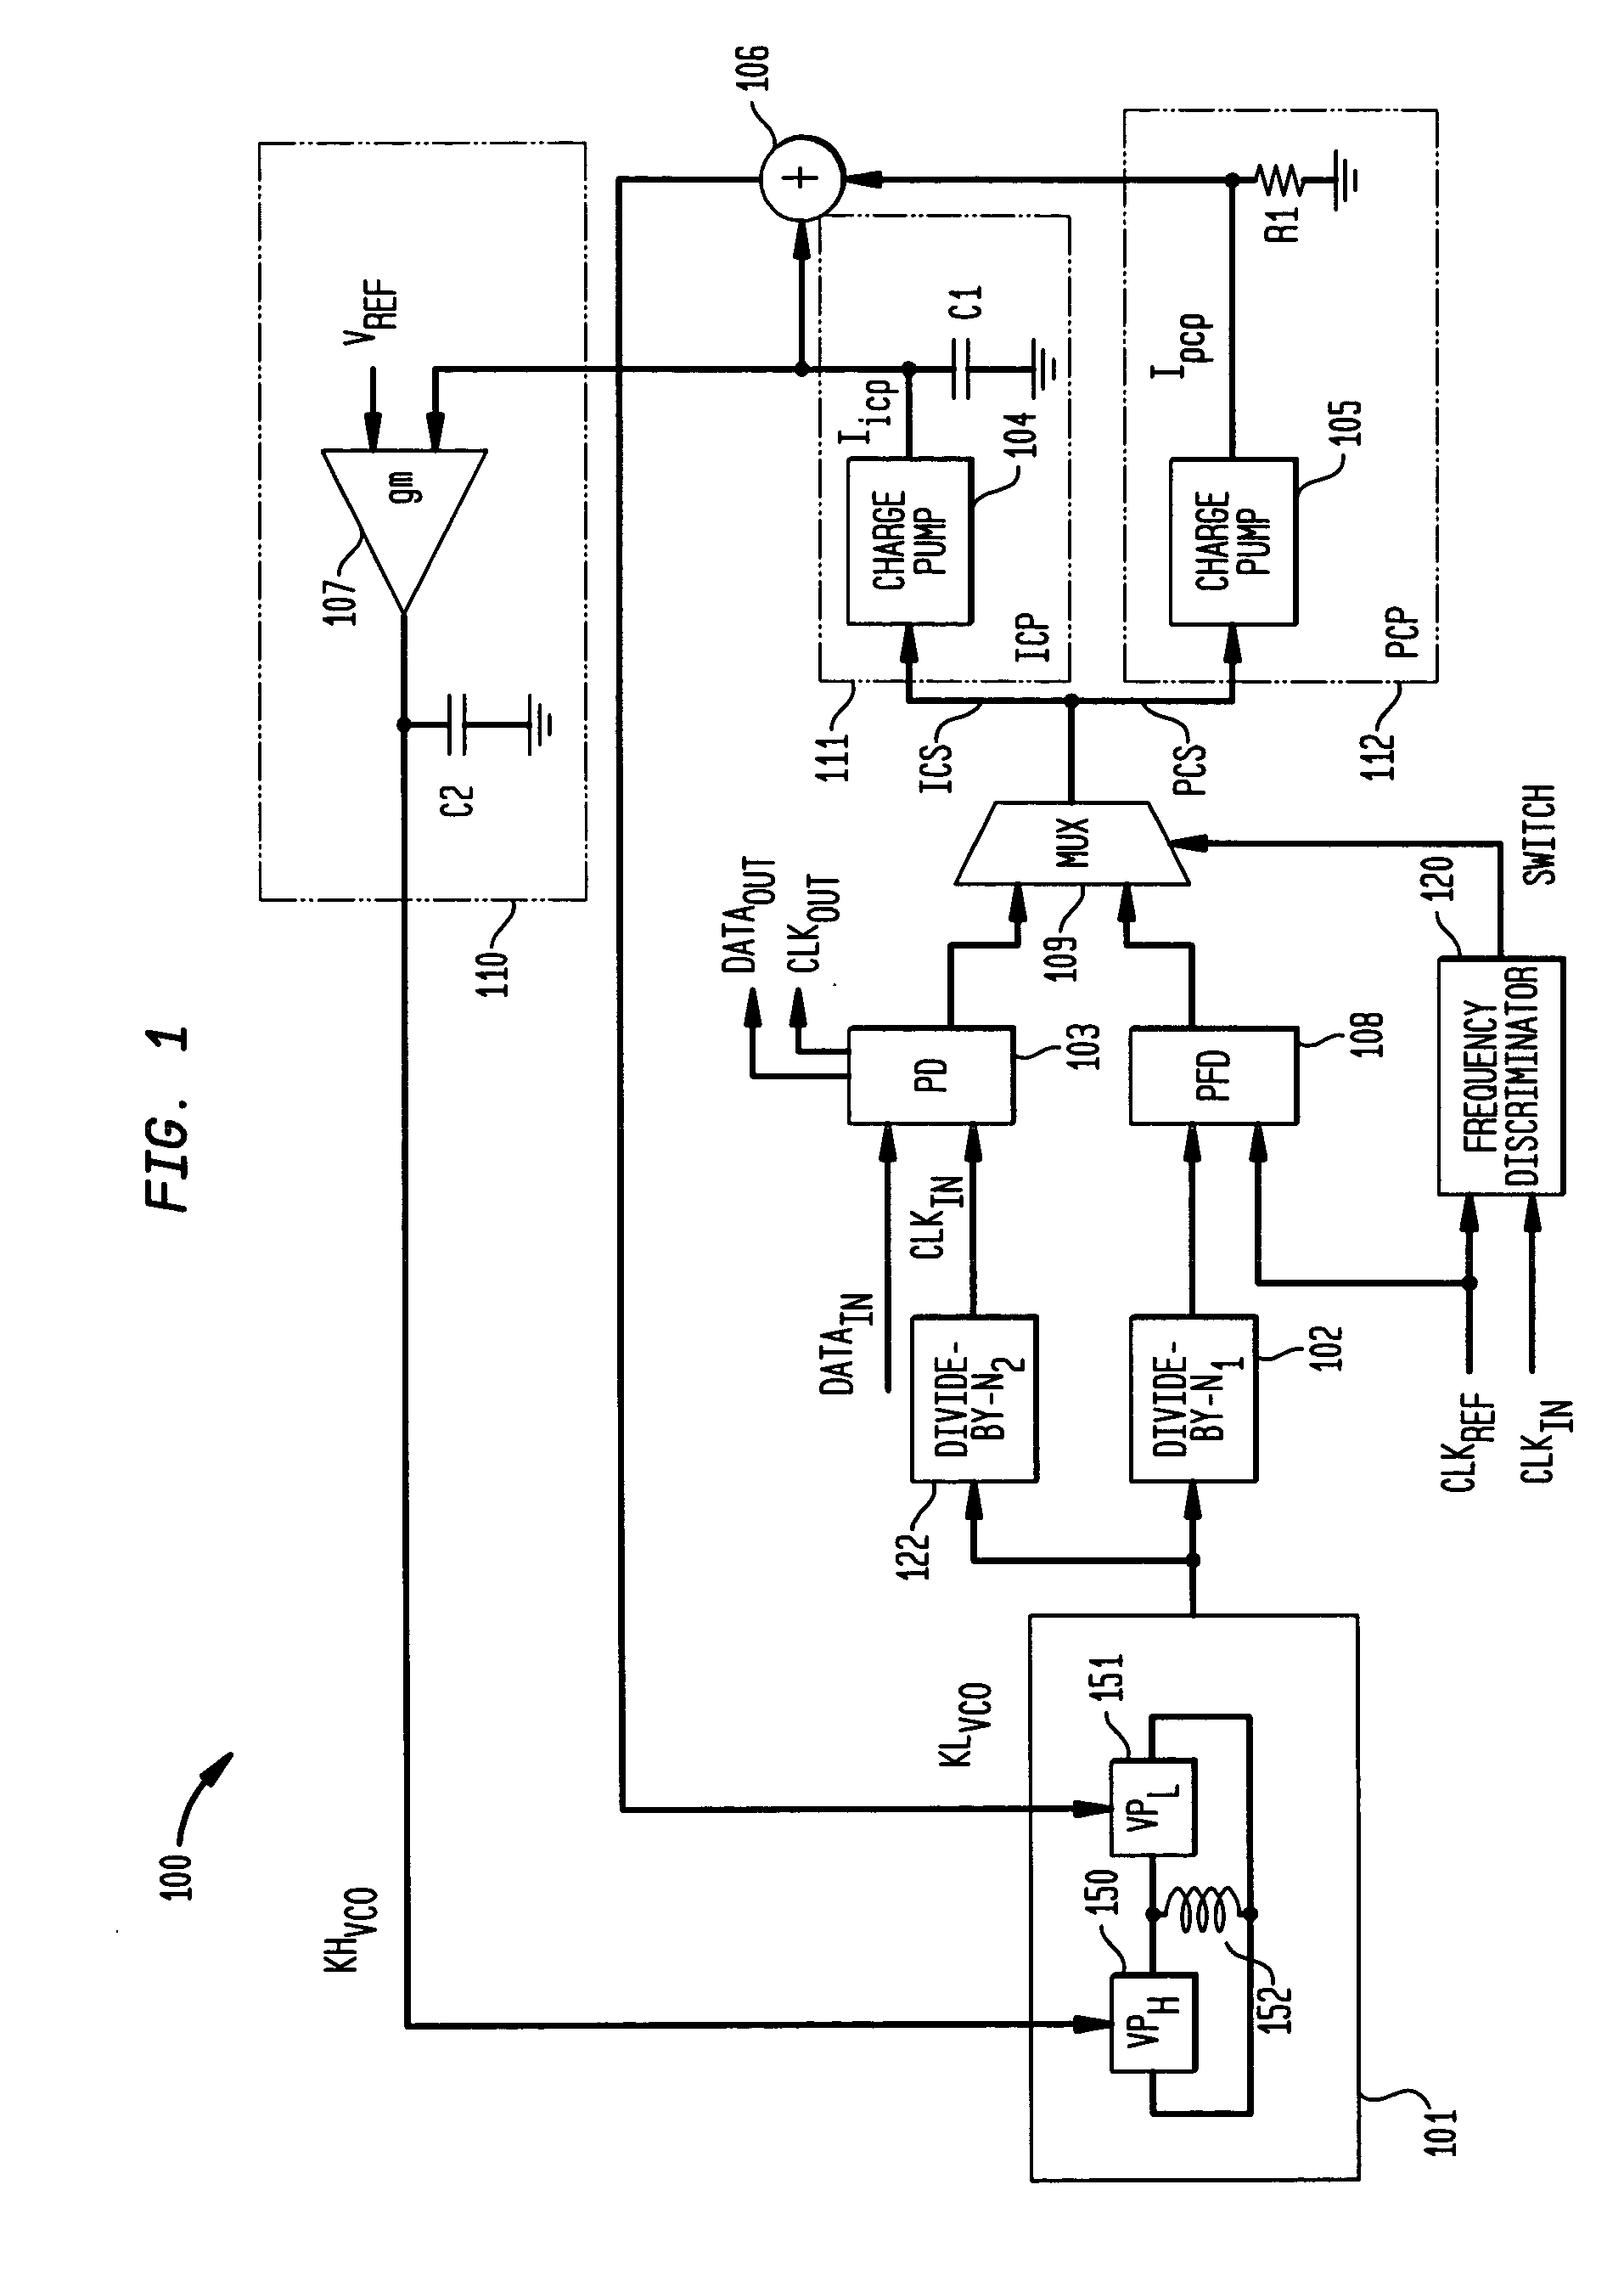 PLL employing a sample-based capacitance multiplier